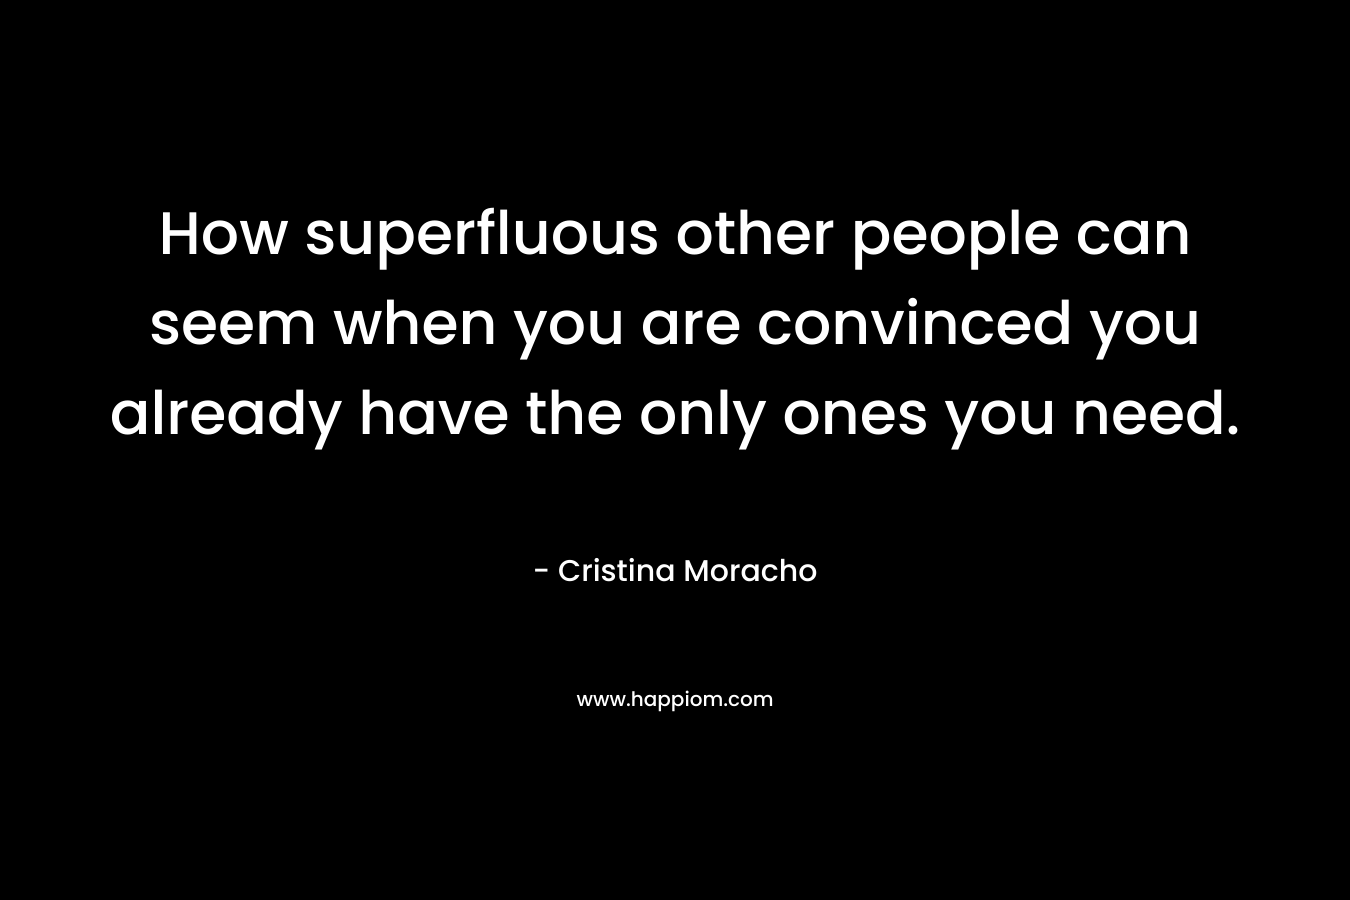 How superfluous other people can seem when you are convinced you already have the only ones you need.